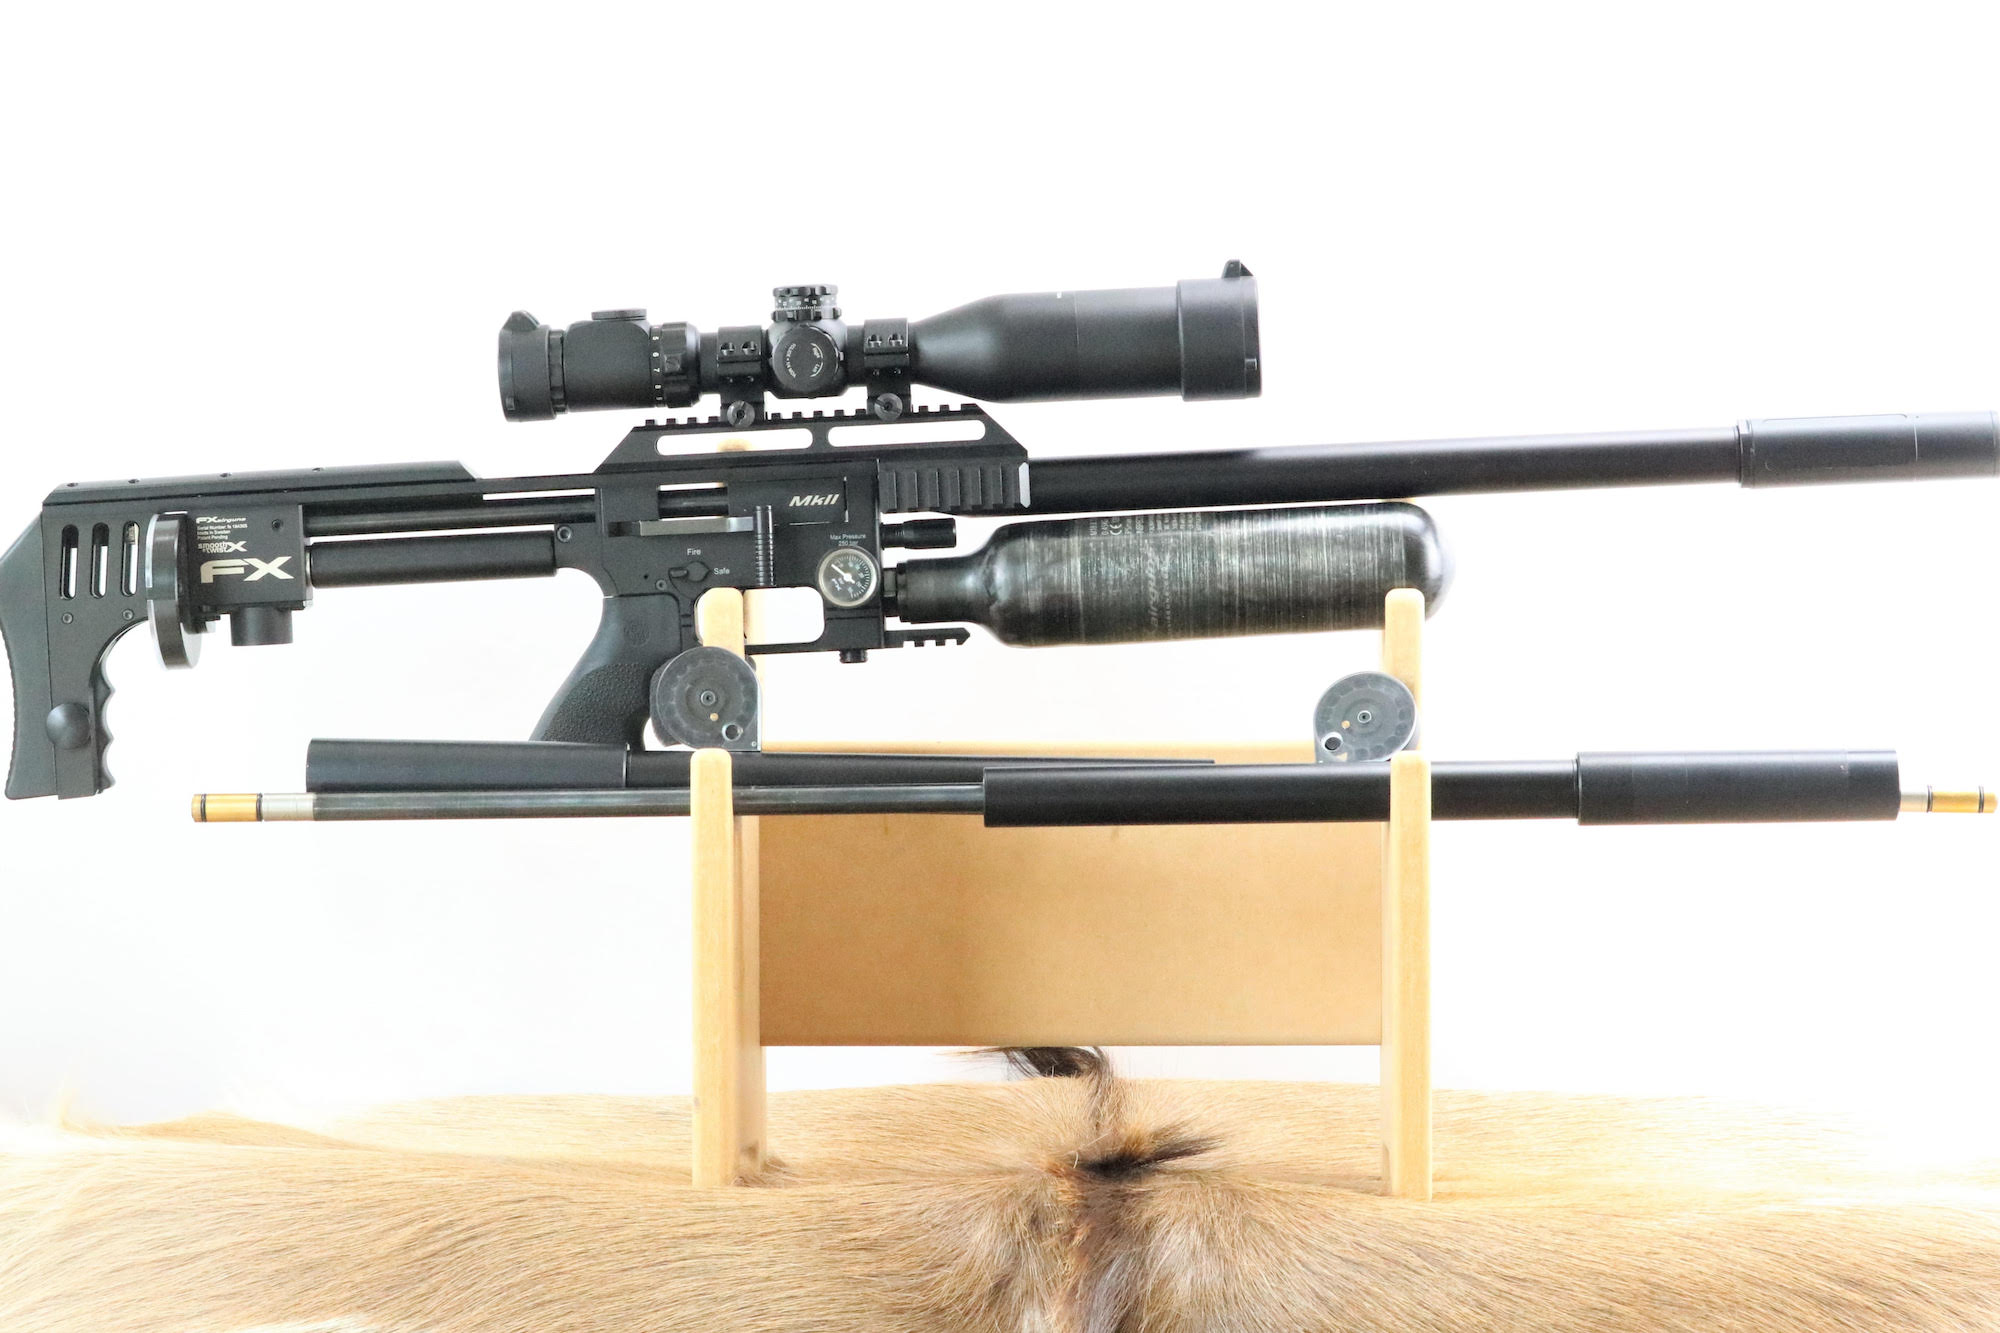 The FX Impact is our pick for best air rifle